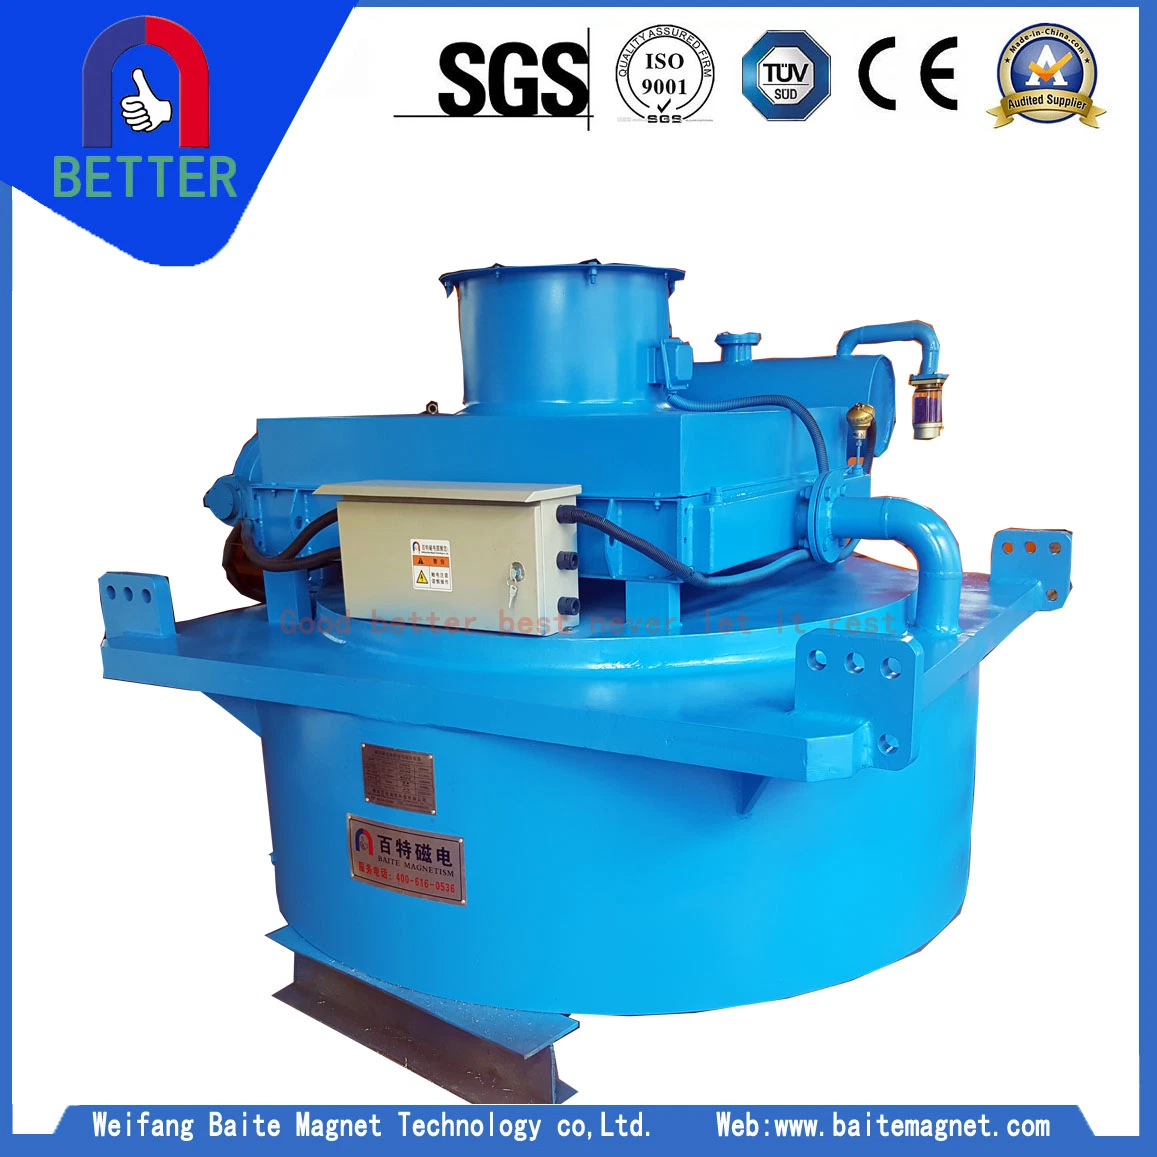 ISO Approved Rcdeb-16 Oil Cooling Electromagnetic Ore Separator (High Intensity 1600mm belt width)